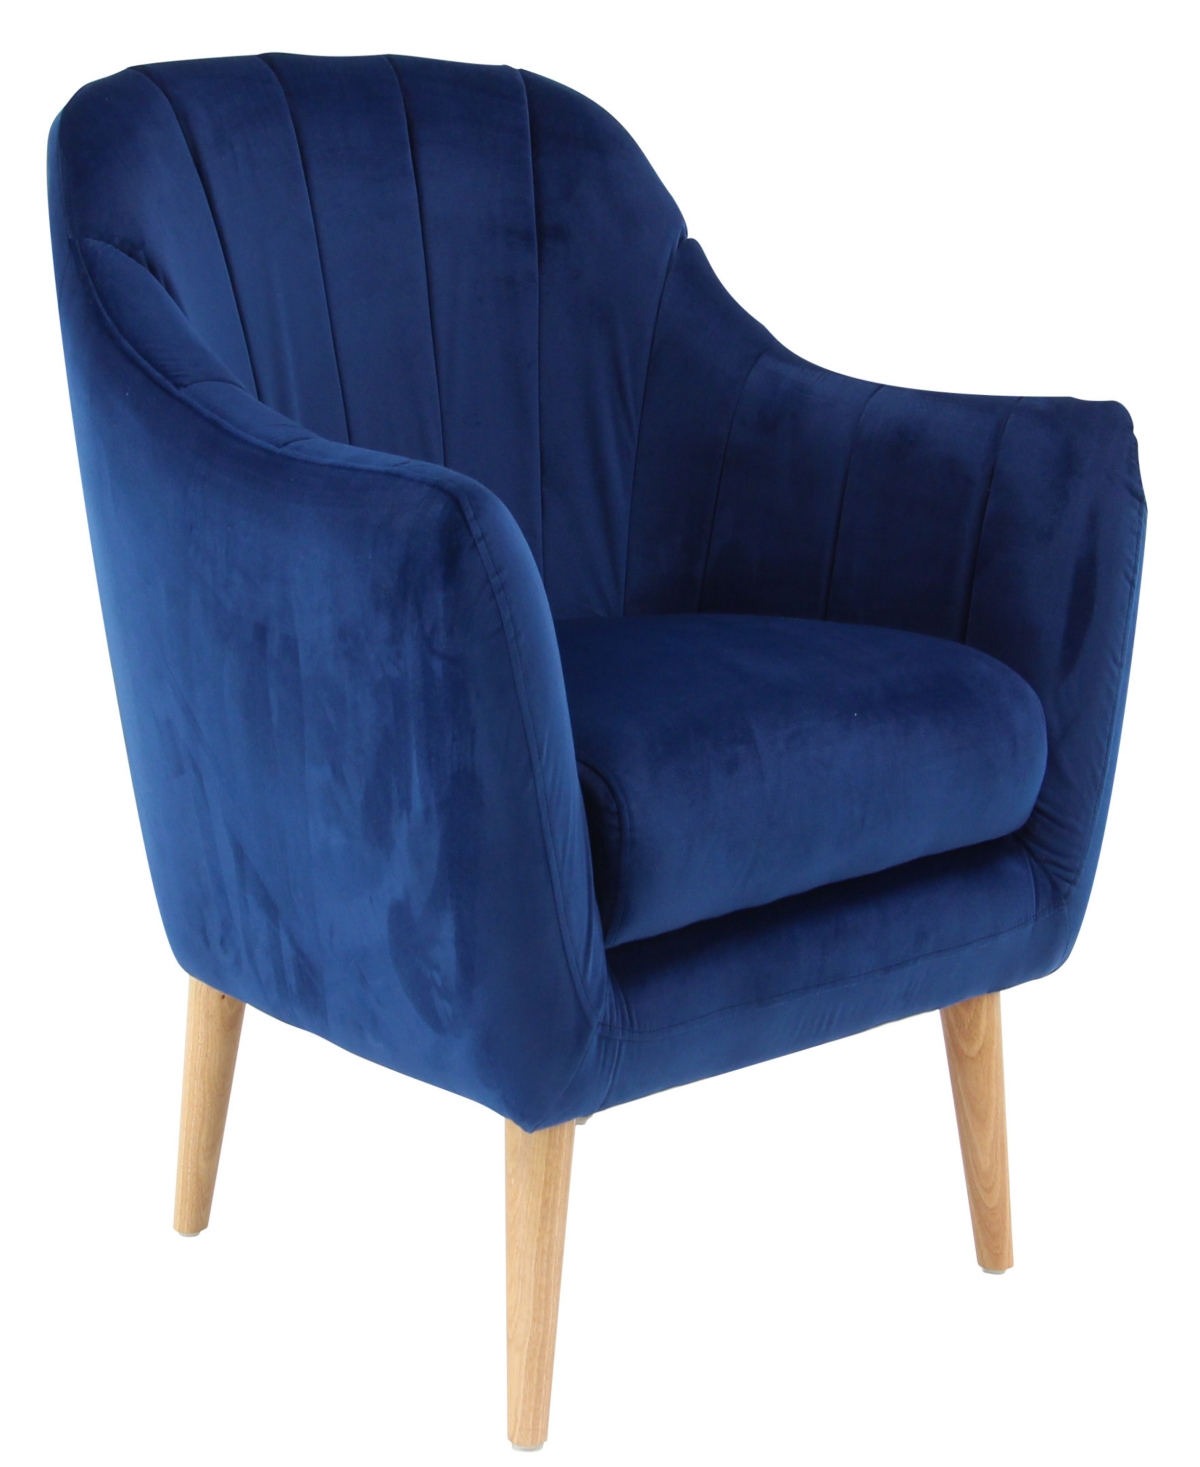 Rosemary Lane Fabric Tufted Accent Chair, 30" X 28" X 32" In Blue